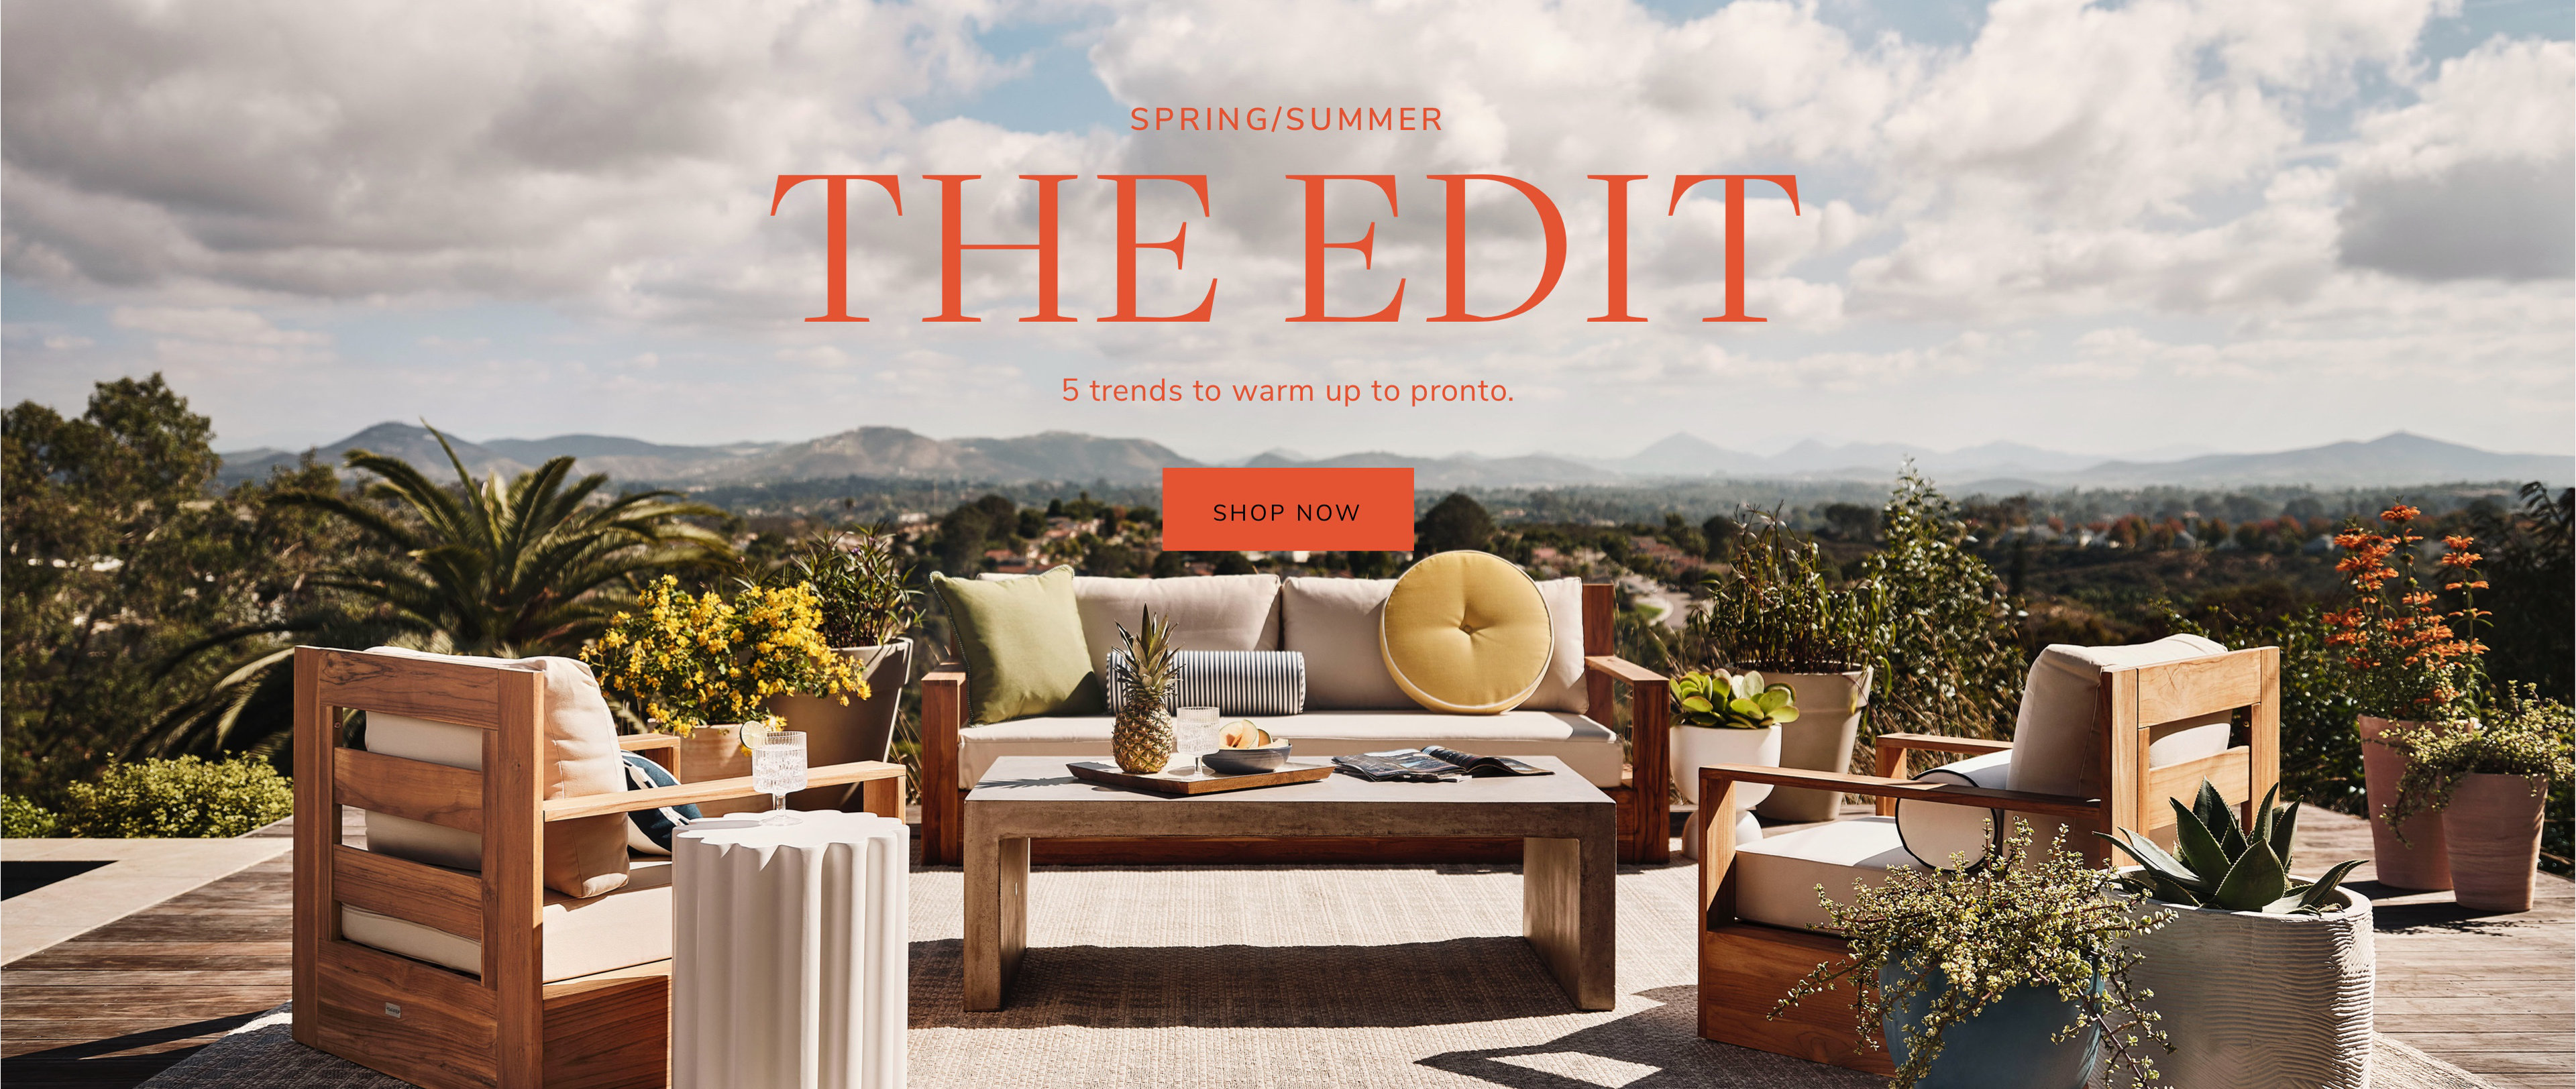 The Spring/Summer Edit. Shop Now. 